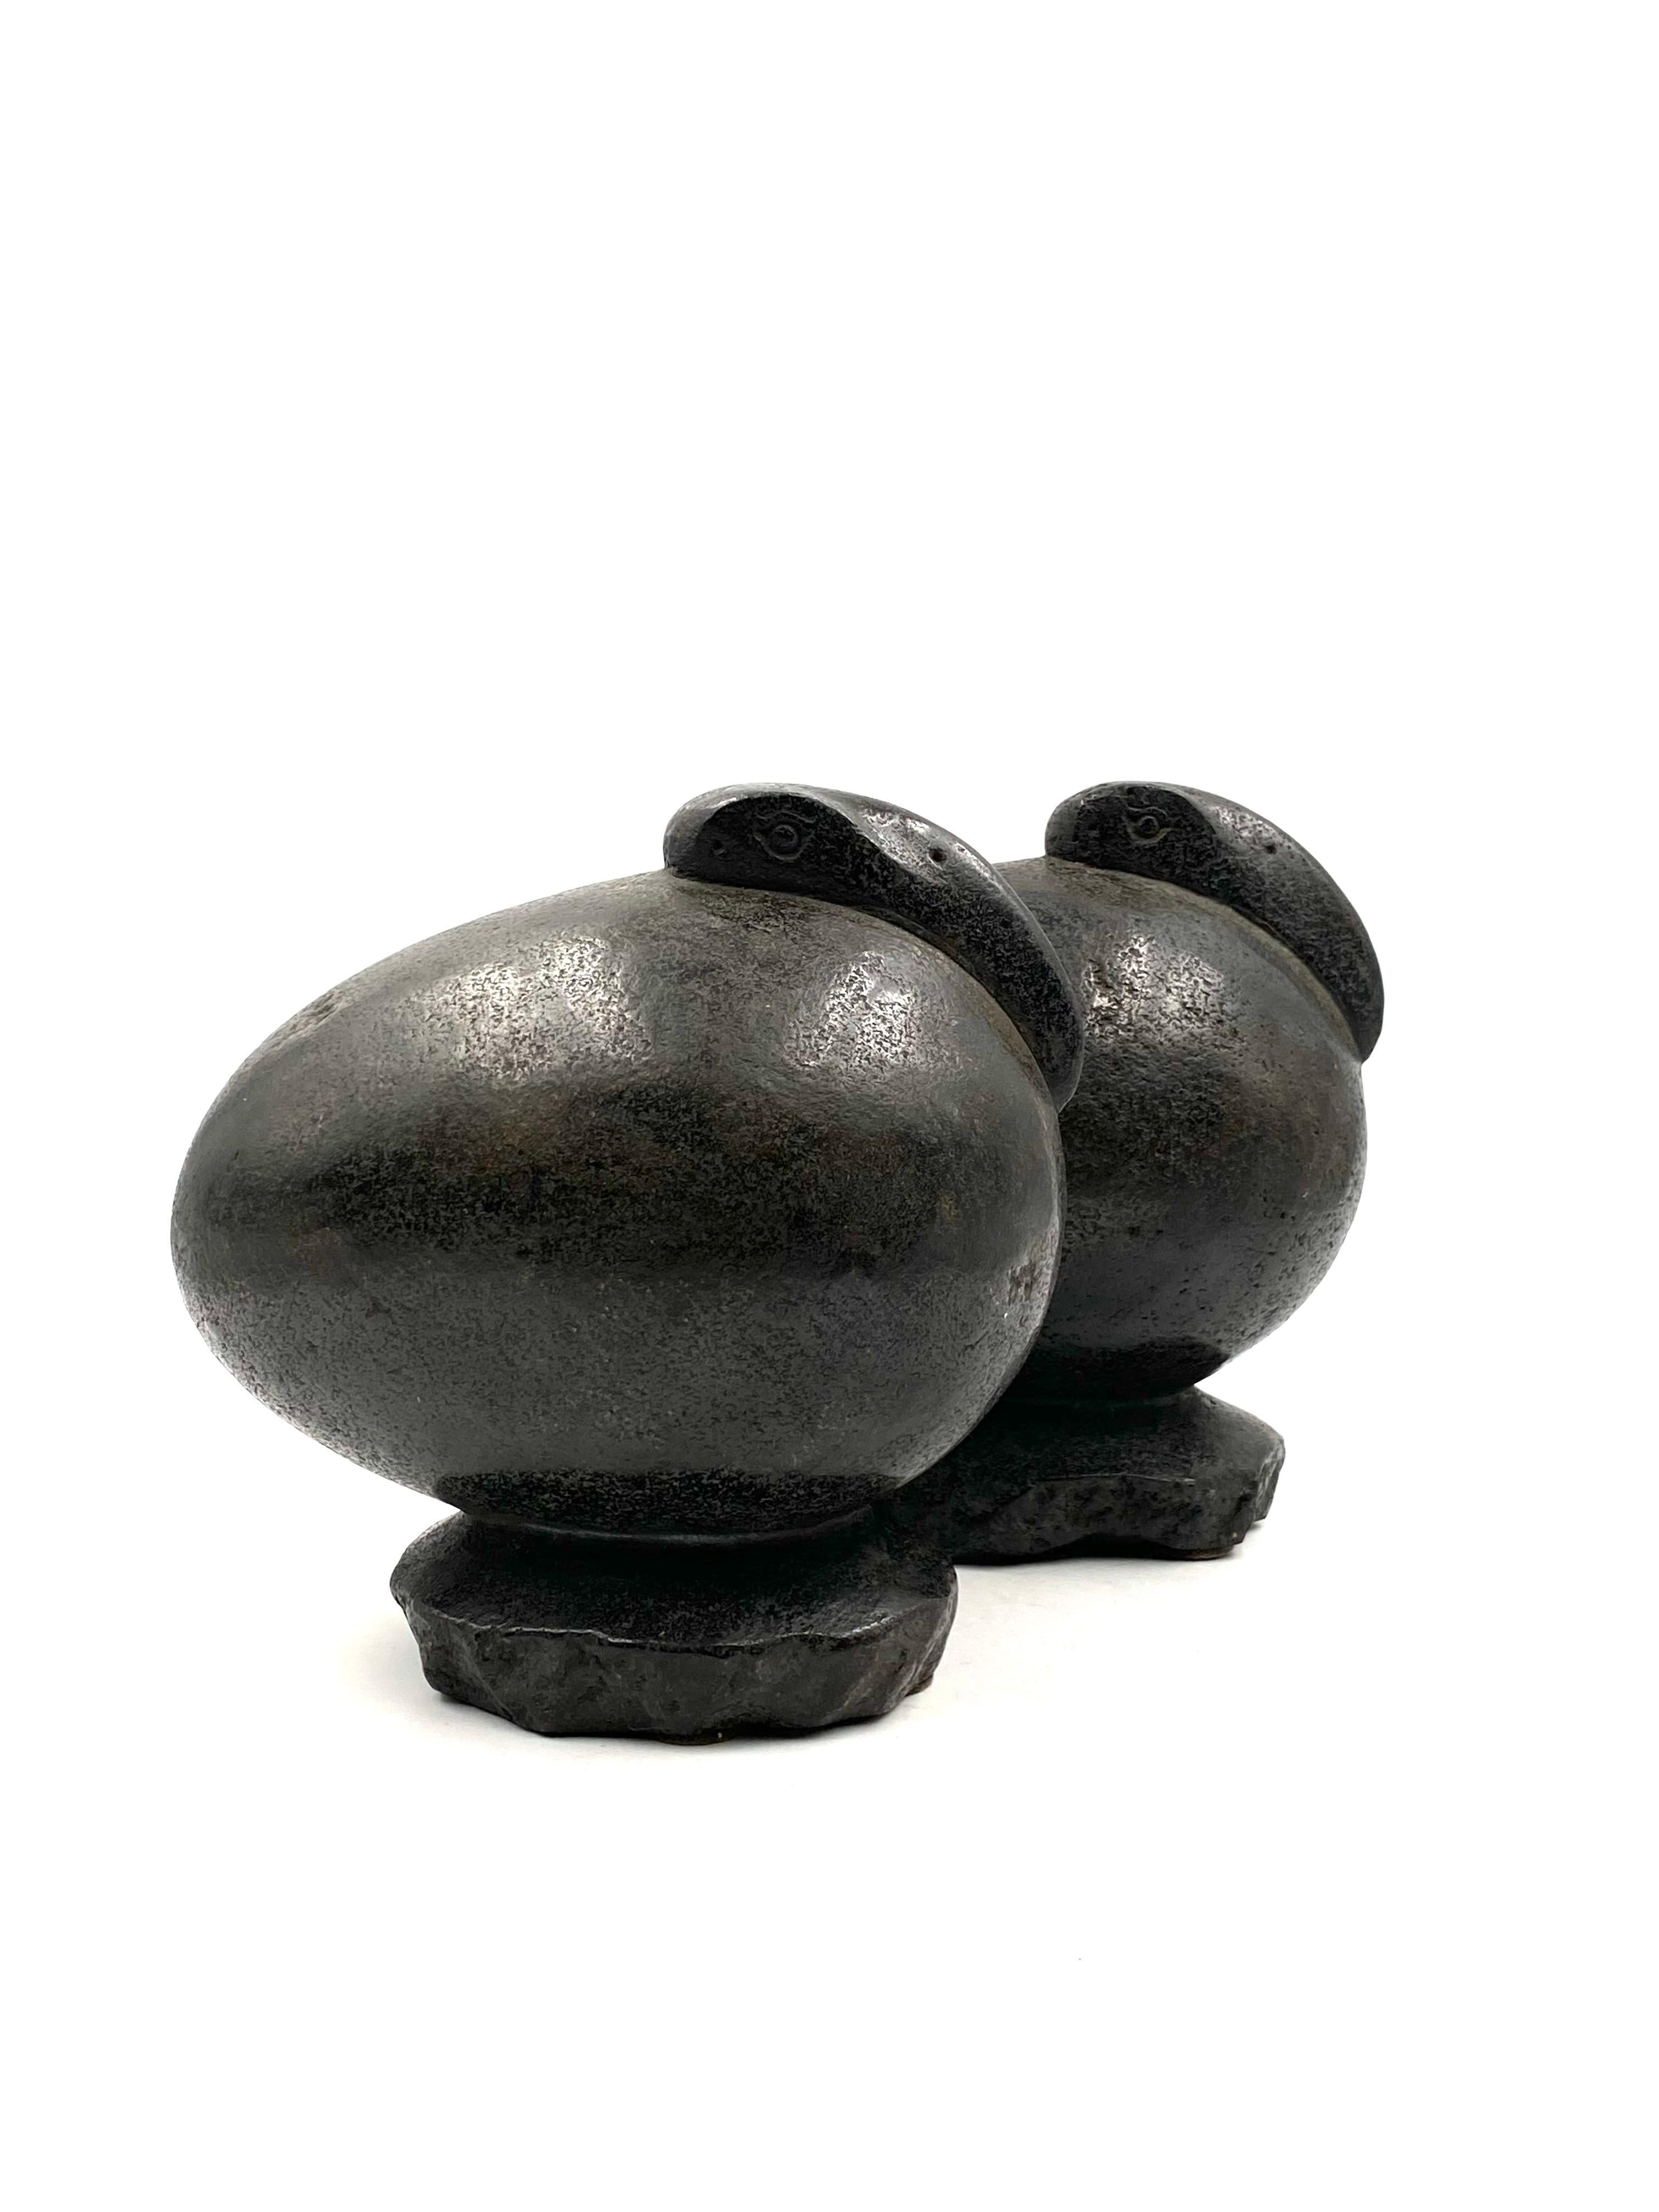 Ibis Birds, Pair of Basalt Ovoid Sculptures, France Early 20th Century 10